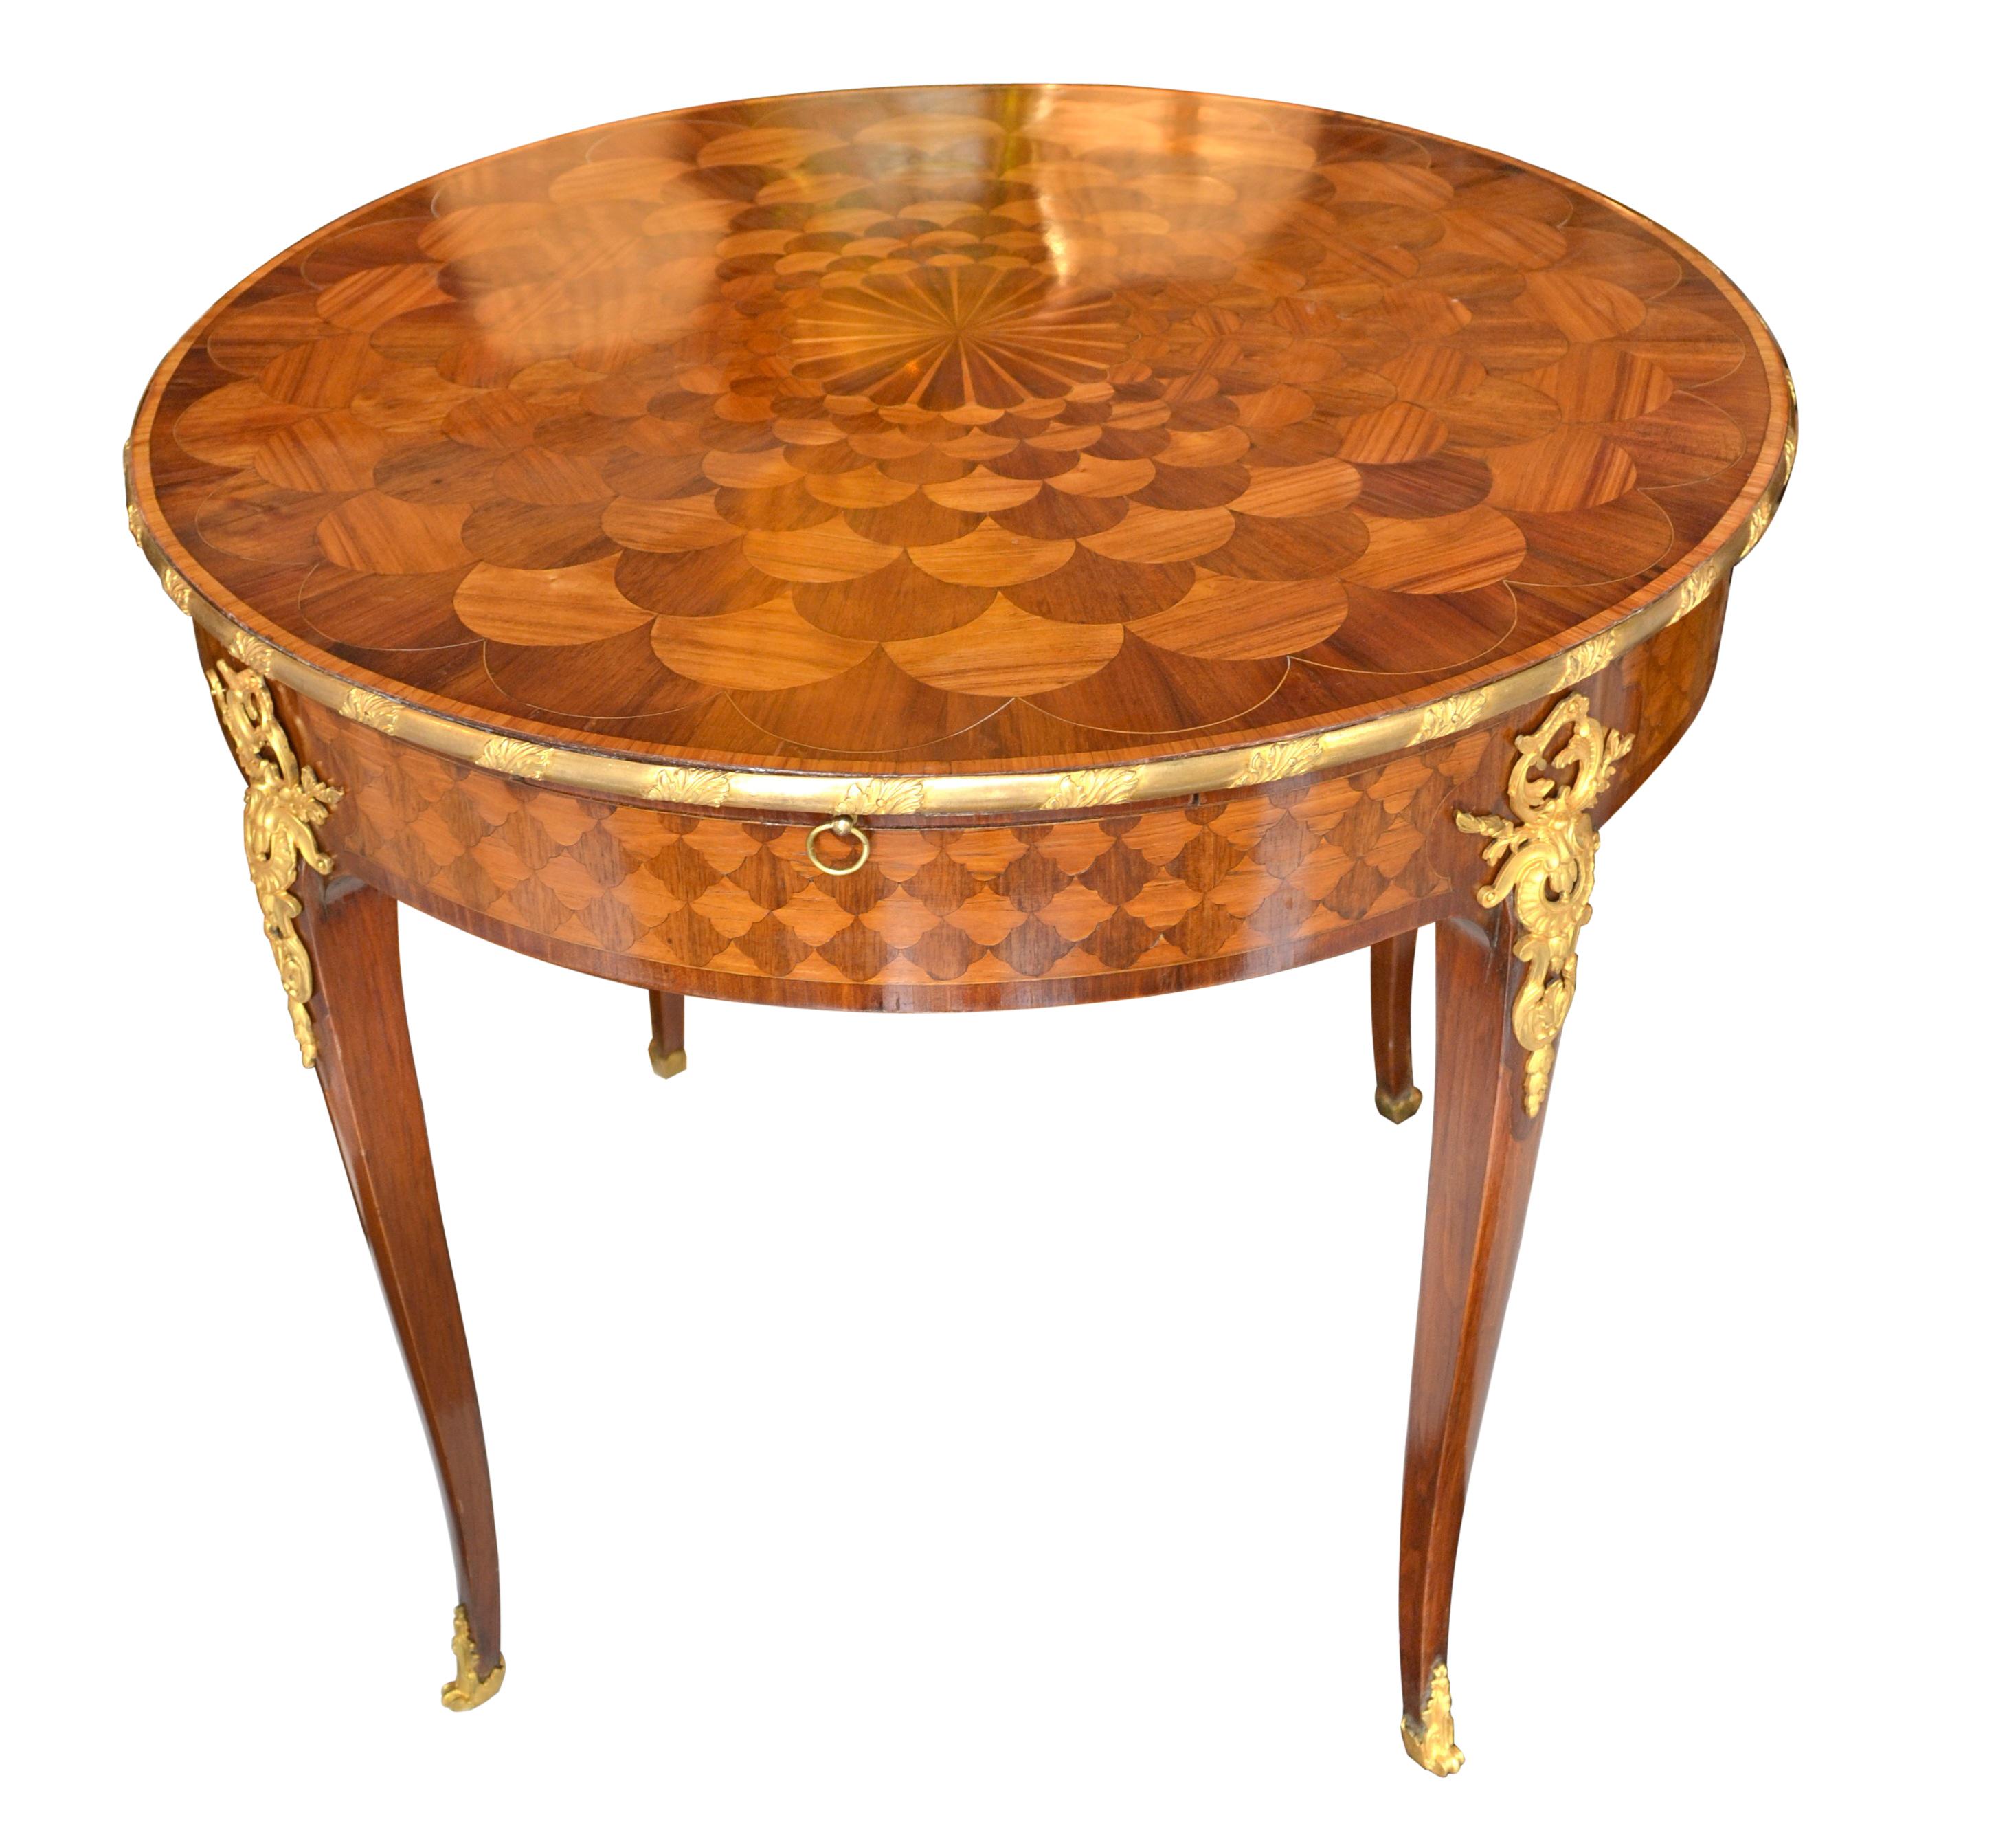 A Louis XV style 19th century French centre or games table, the quality of which could be attributed to the Linke workshop in Paris. The table is completely veneered in various woods including tulipwood and amaranth with the top inlaid in a